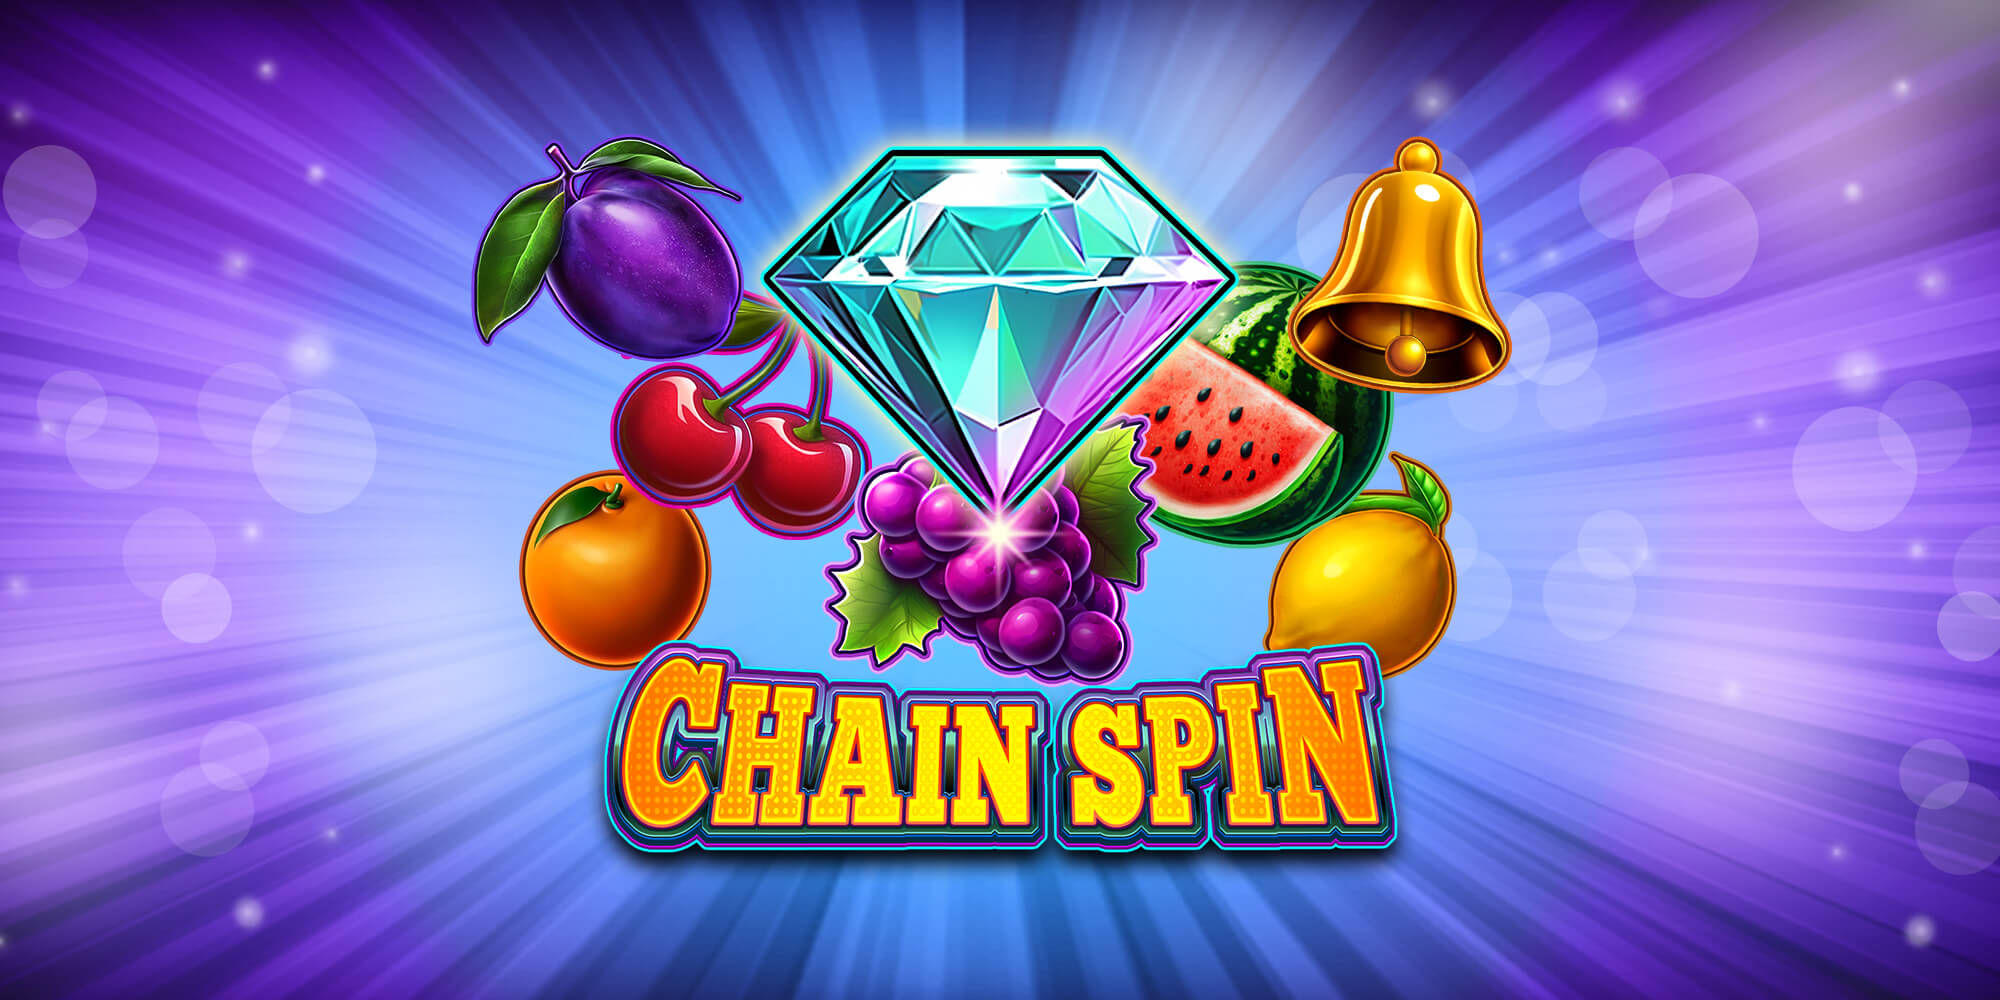 Chain Spin